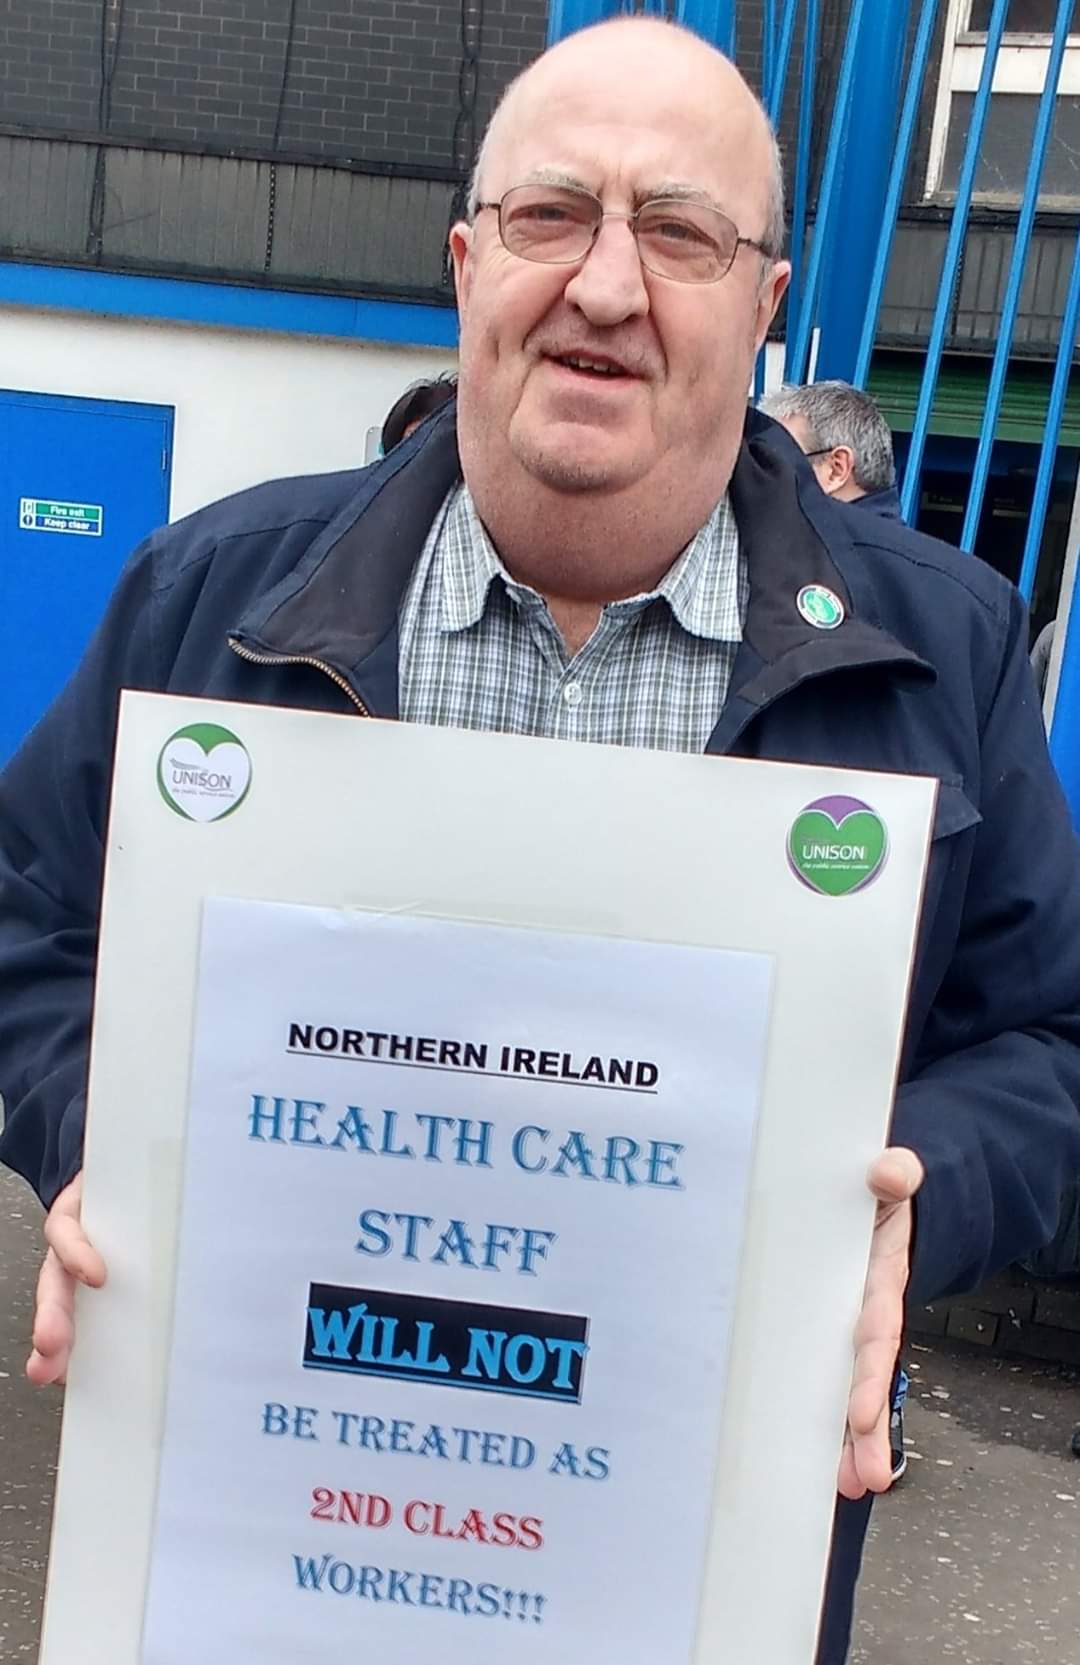 ON THE PICKET LINE: Denis Keatings was tireless in service of workers in health and social care sector